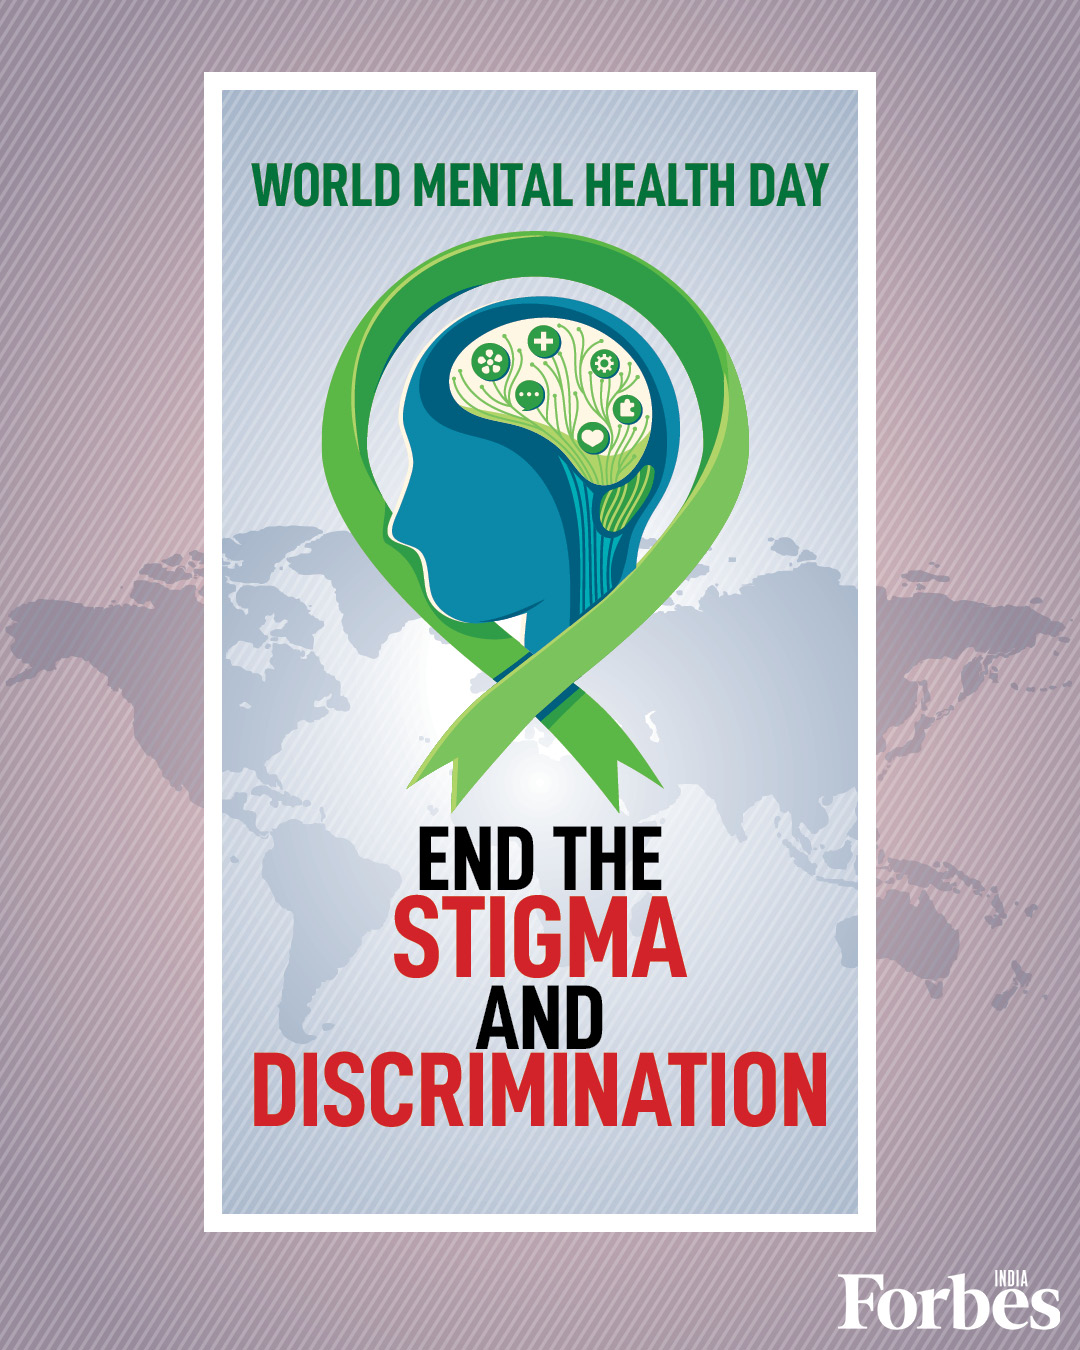 World Mental Health Day: A look at how people perceive it today, and the role of stigma